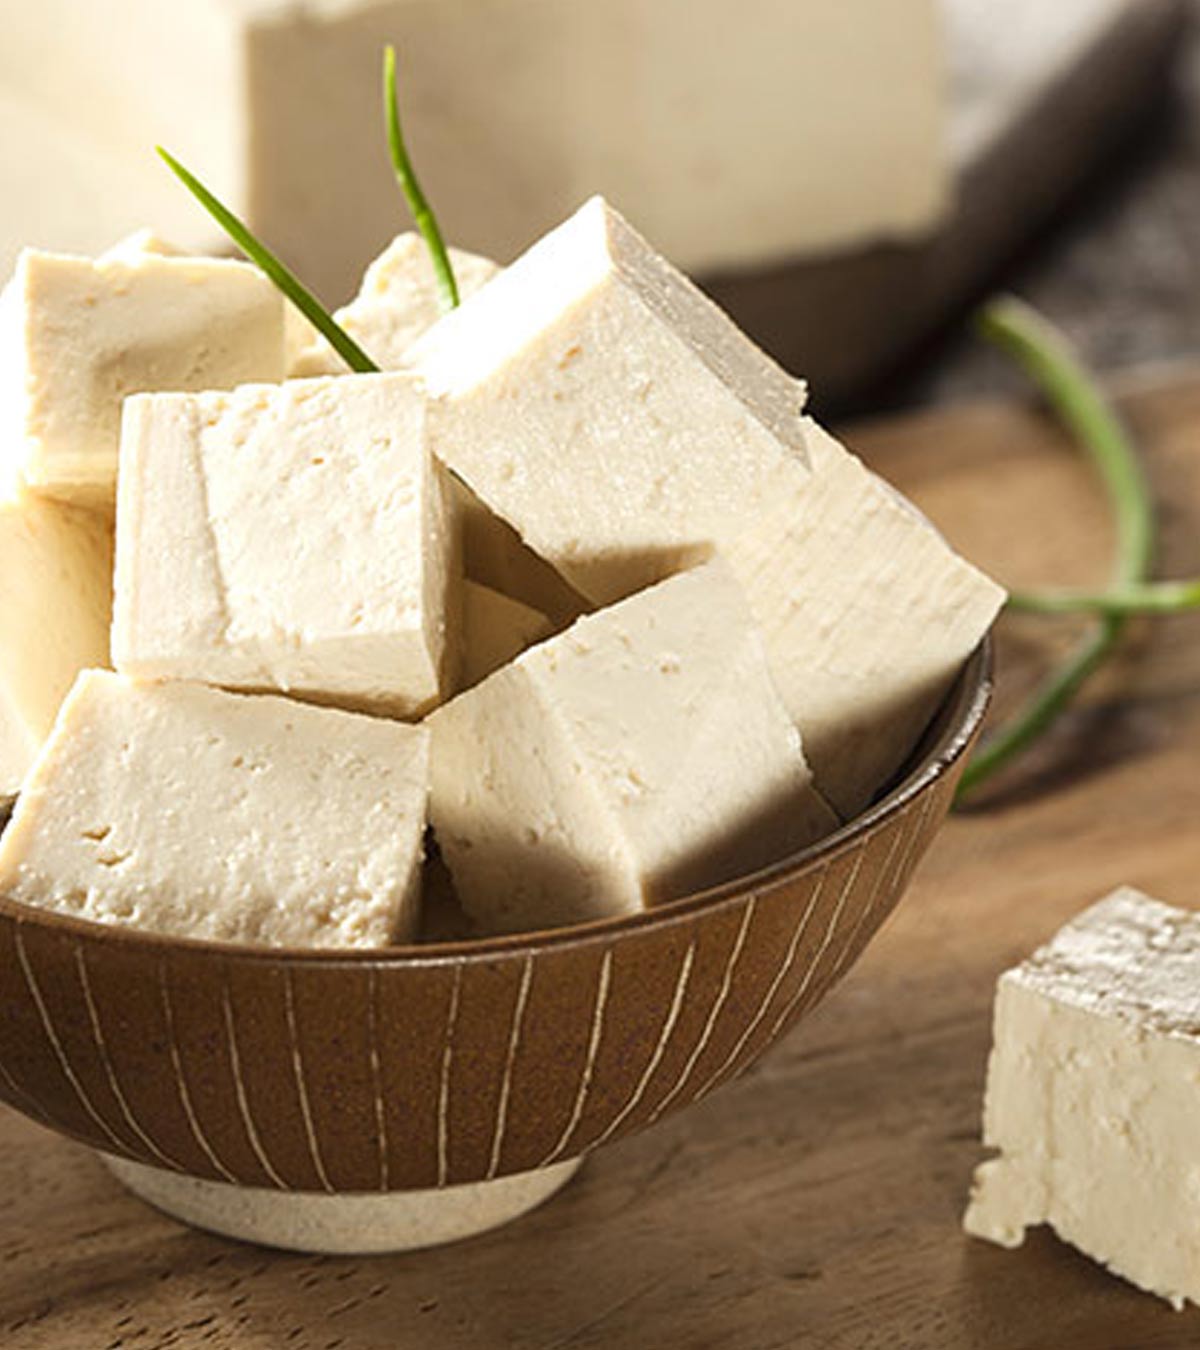 Paneer During Pregnancy: Benefits And Side Effects